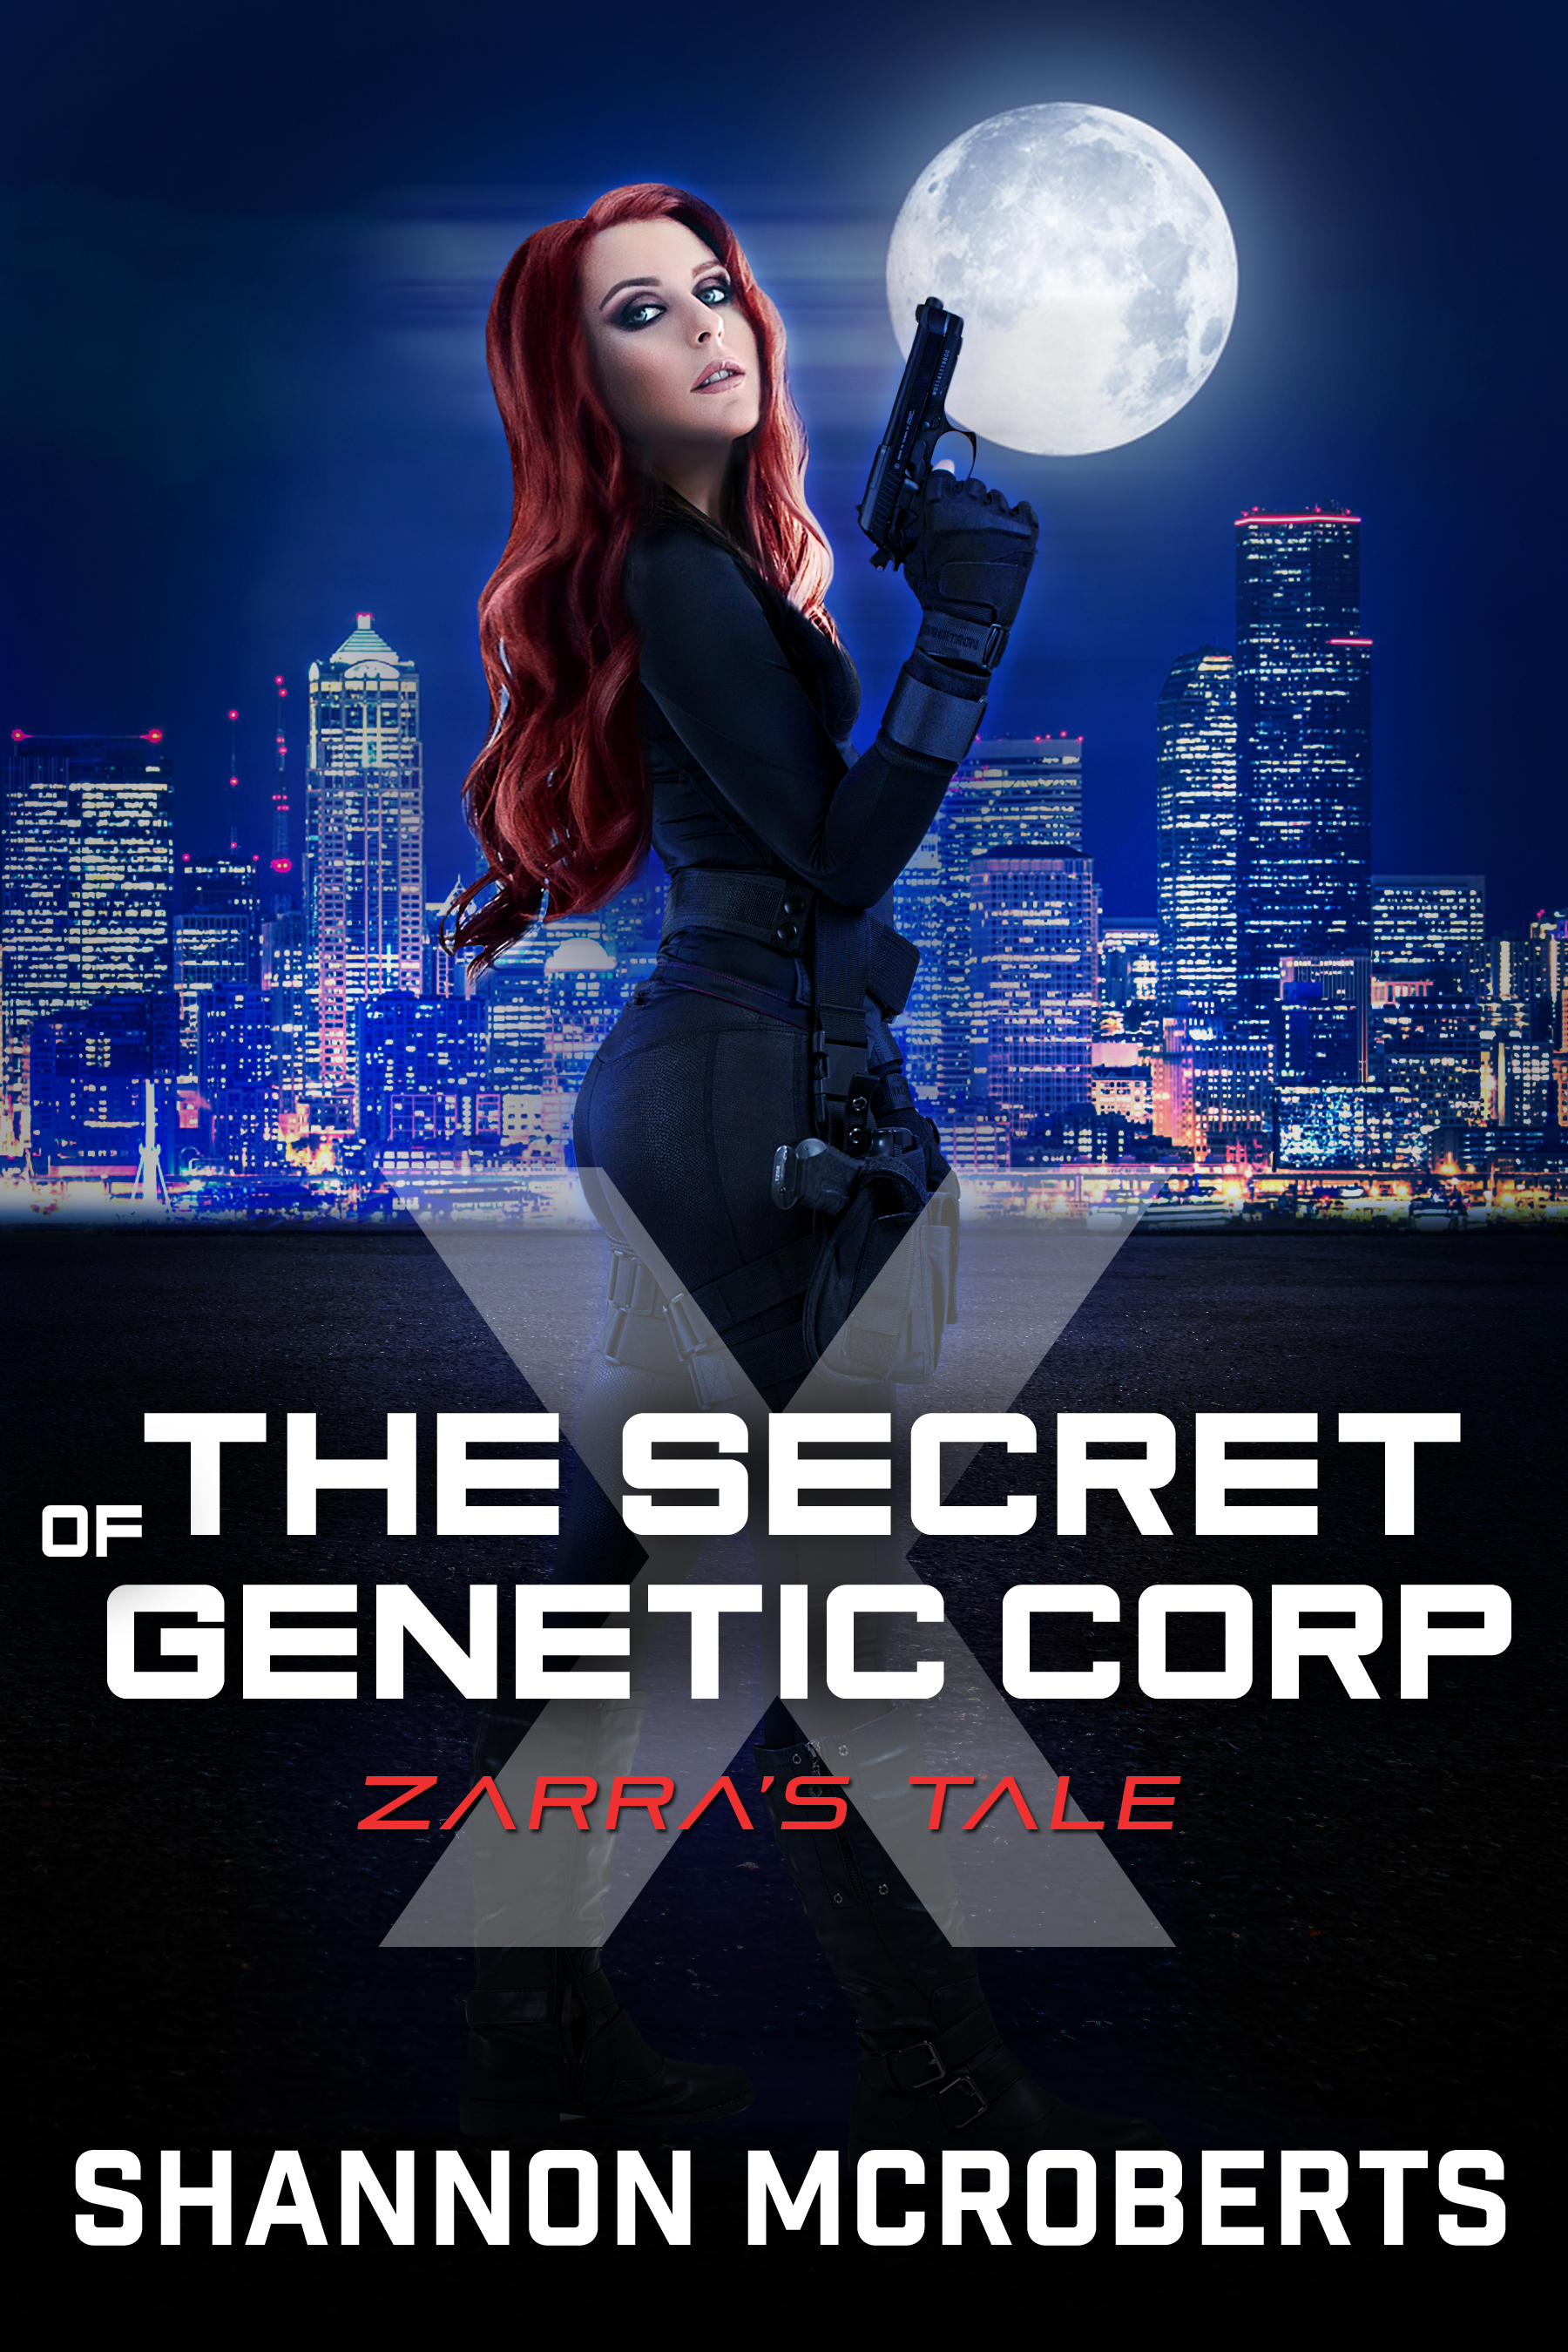 Book cover - The Secret of Genetic Corp by Shannon McRoberts